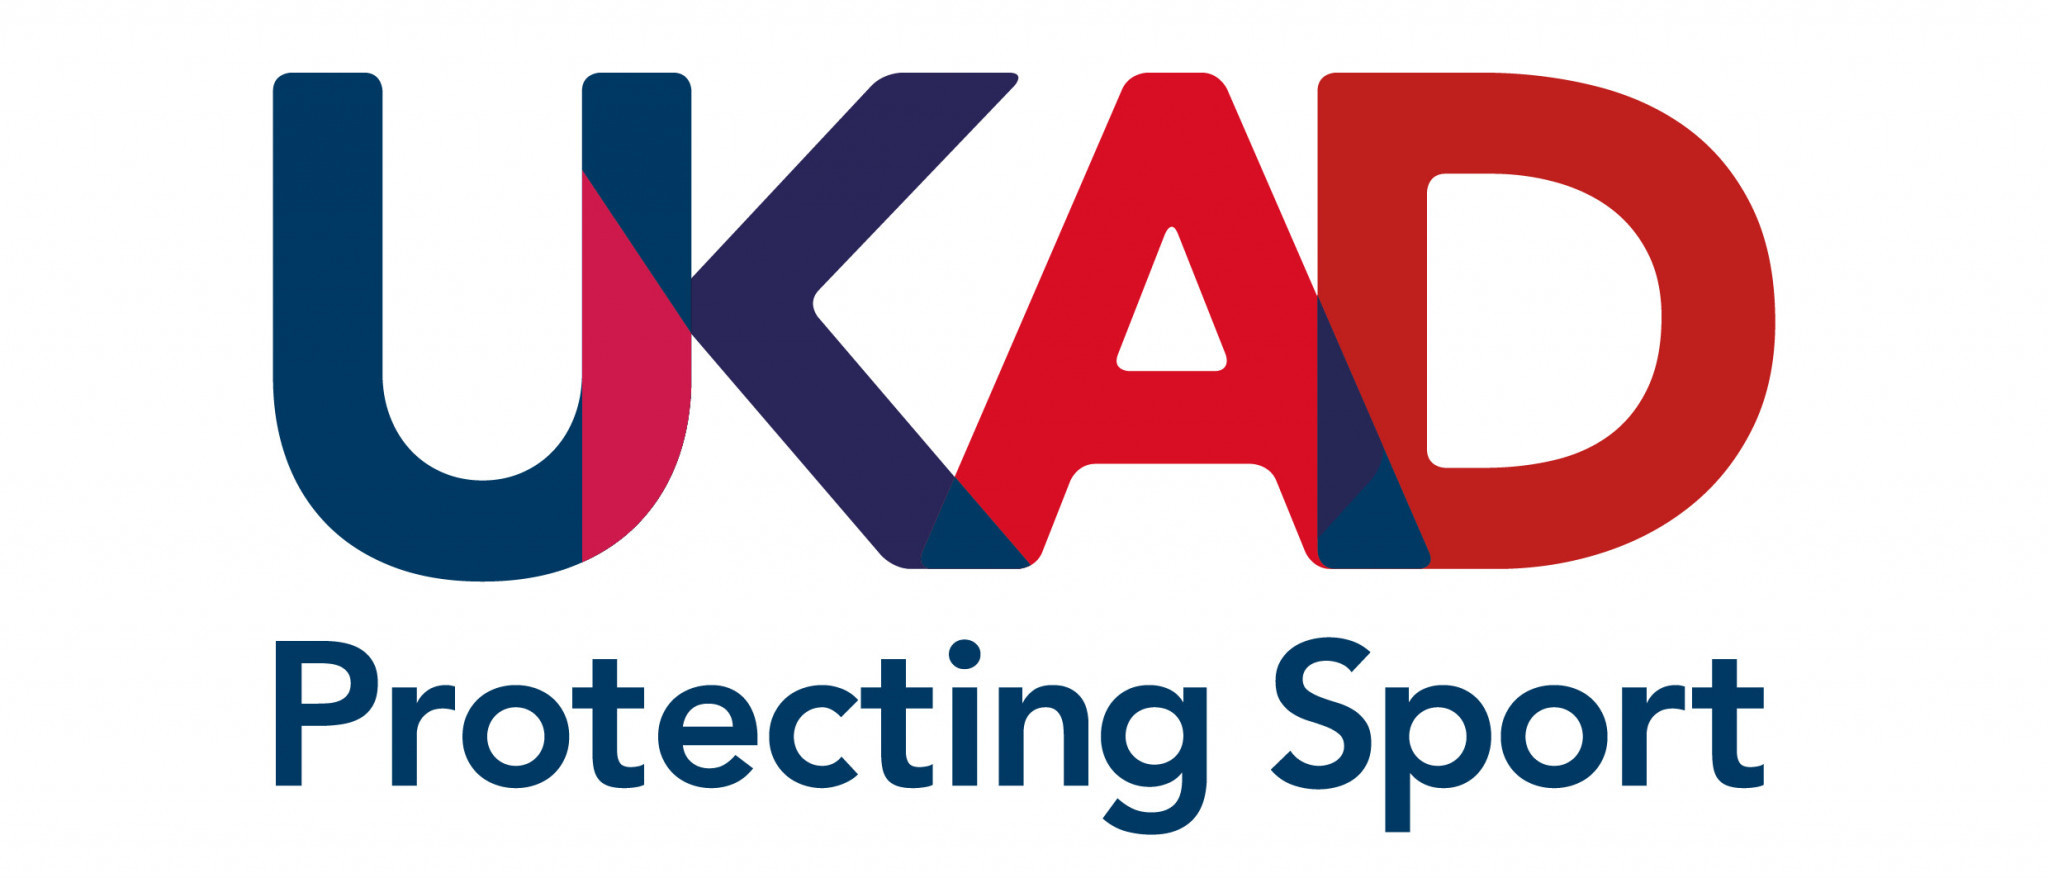 UKAD conducted more than 1,400 tests during second quarter of year, figures show